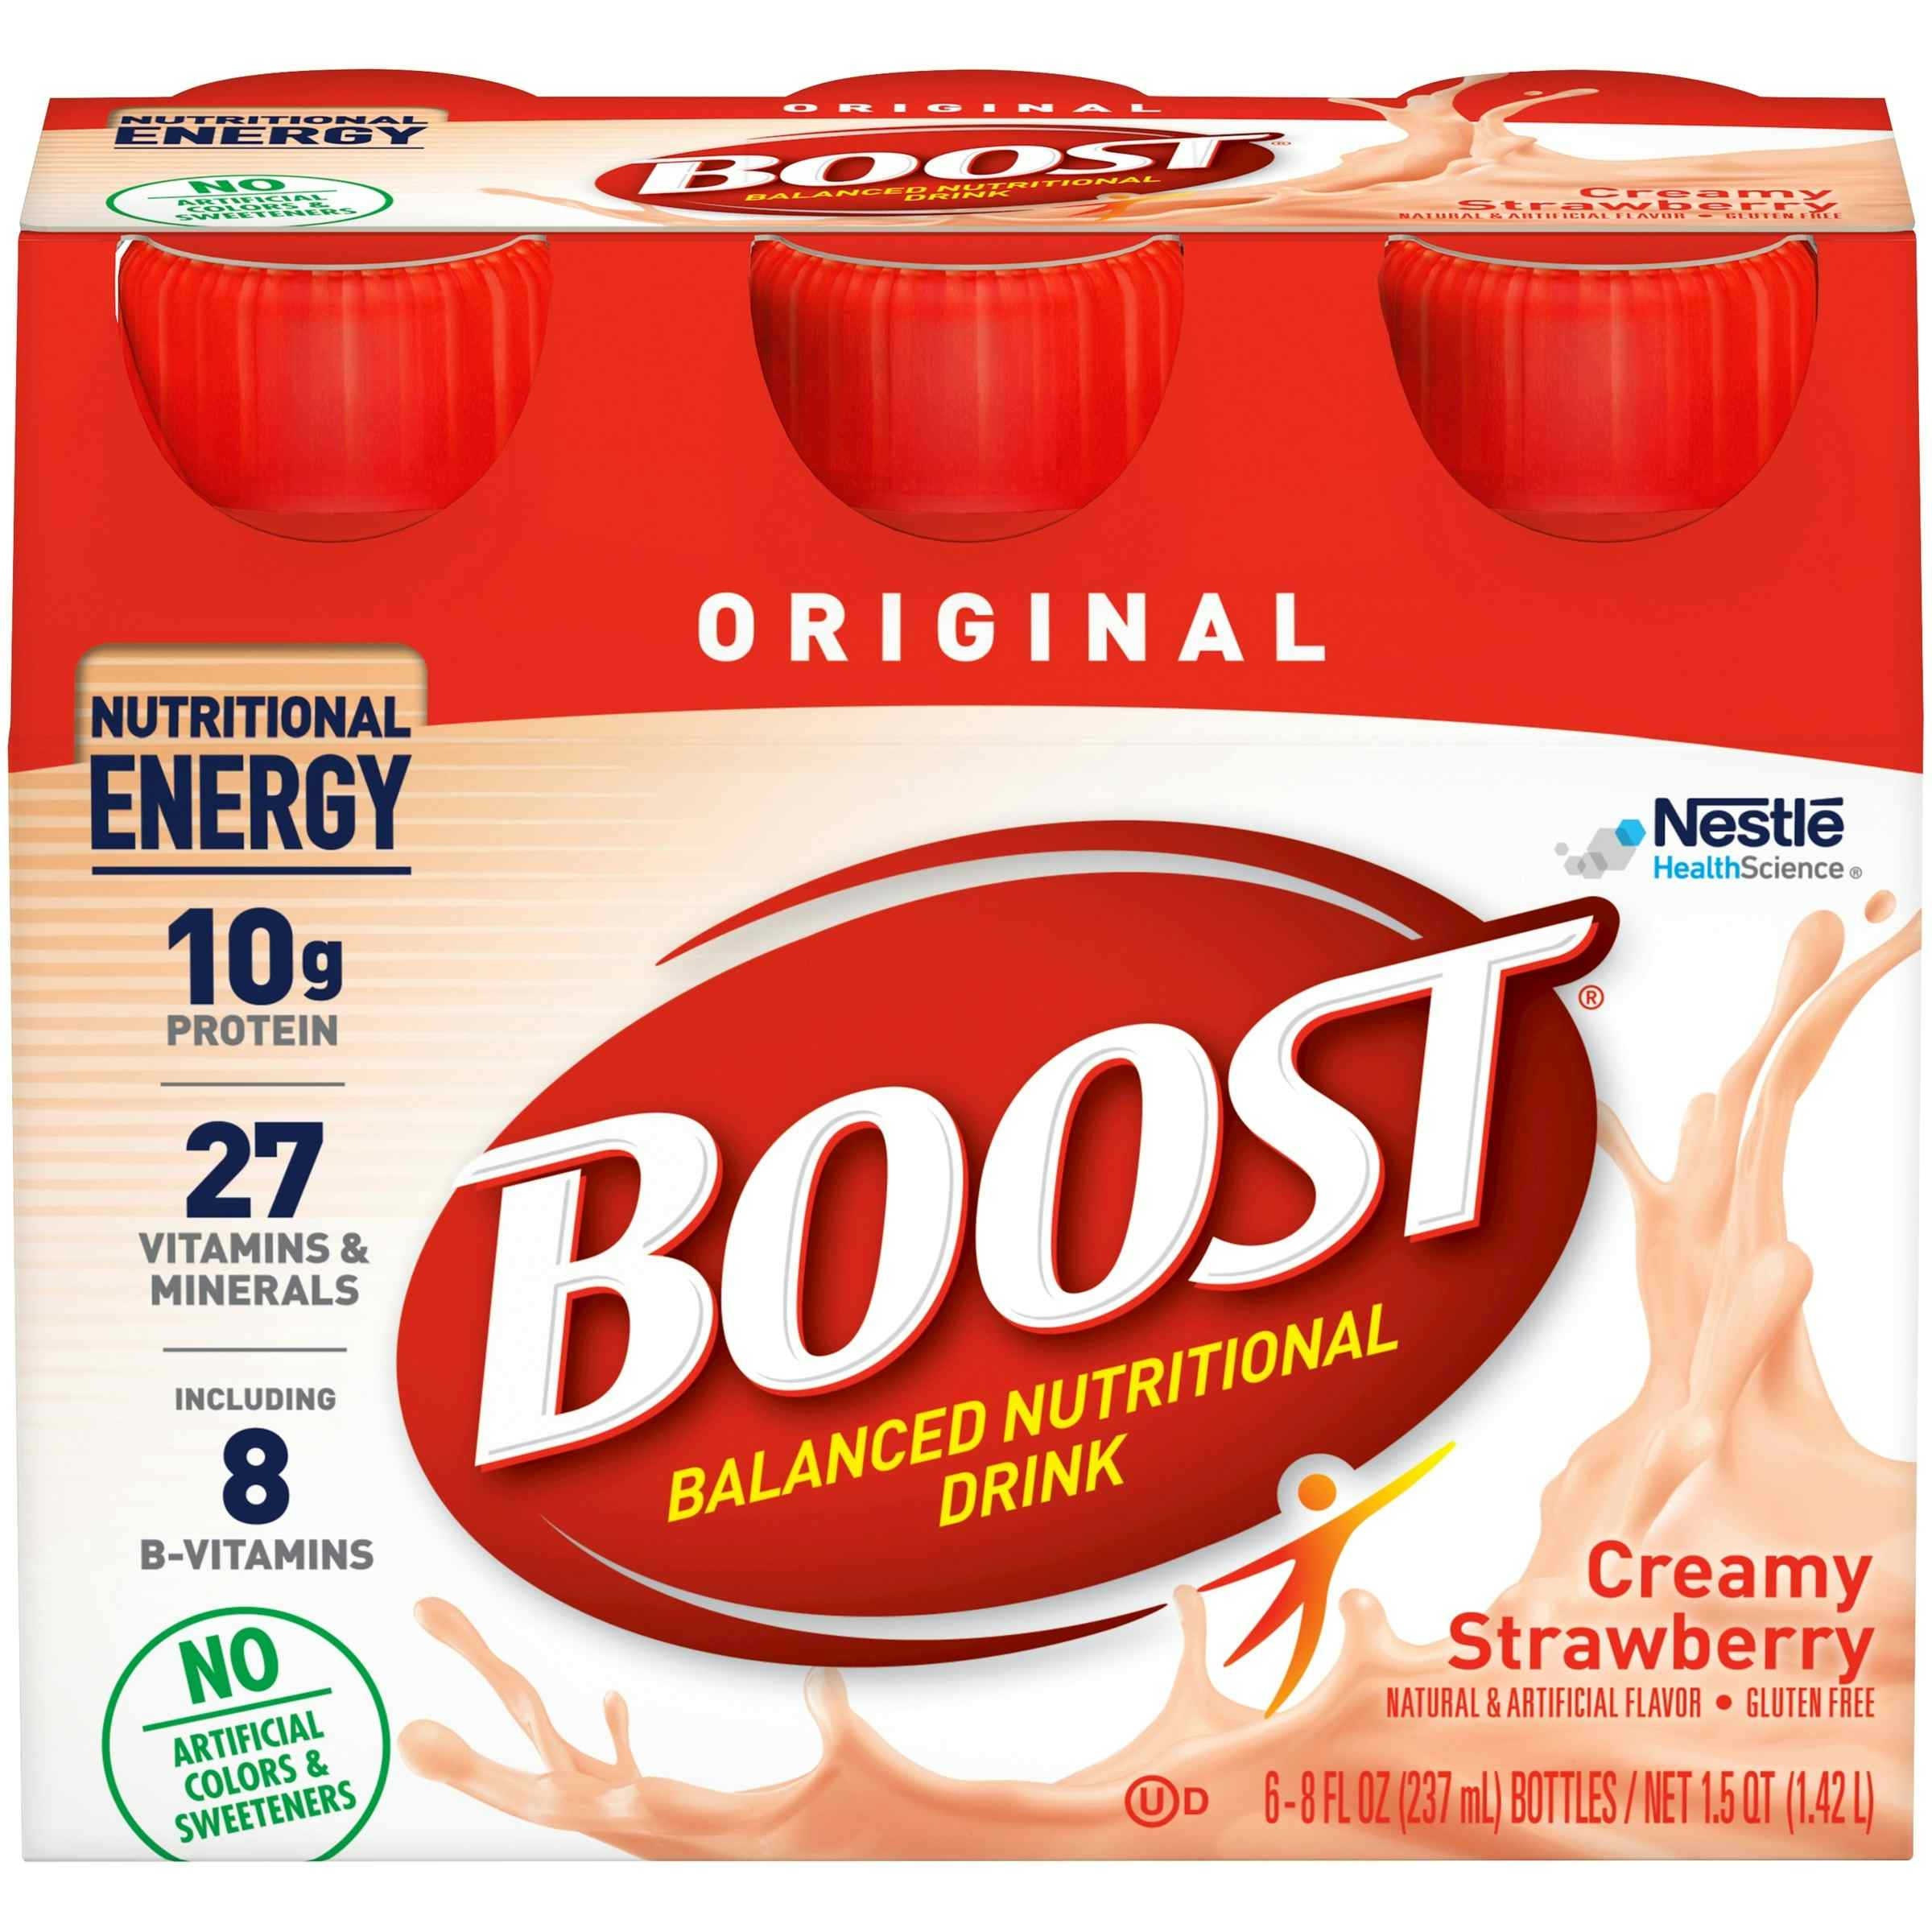 Boost Original Oral Supplement, Creamy Strawberry, 8 oz., 00041679676363, Pack of 6